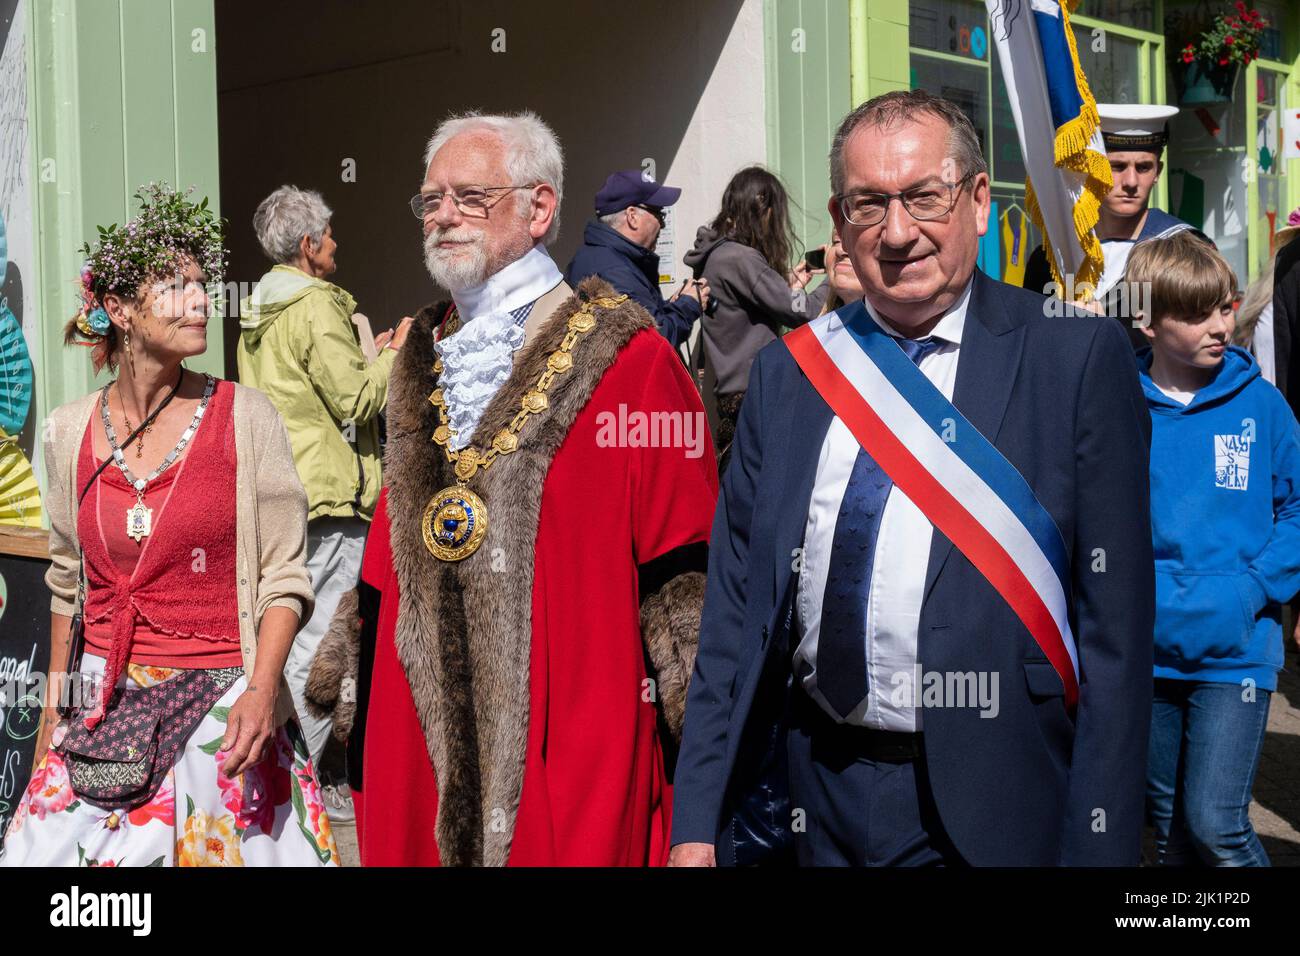 Mayor of Penzance Jonathan How accompanied by his consort Lesley Bradley and the mayor of Concarneau Marc Bigot leading the civic parade on Mazey Day Stock Photo